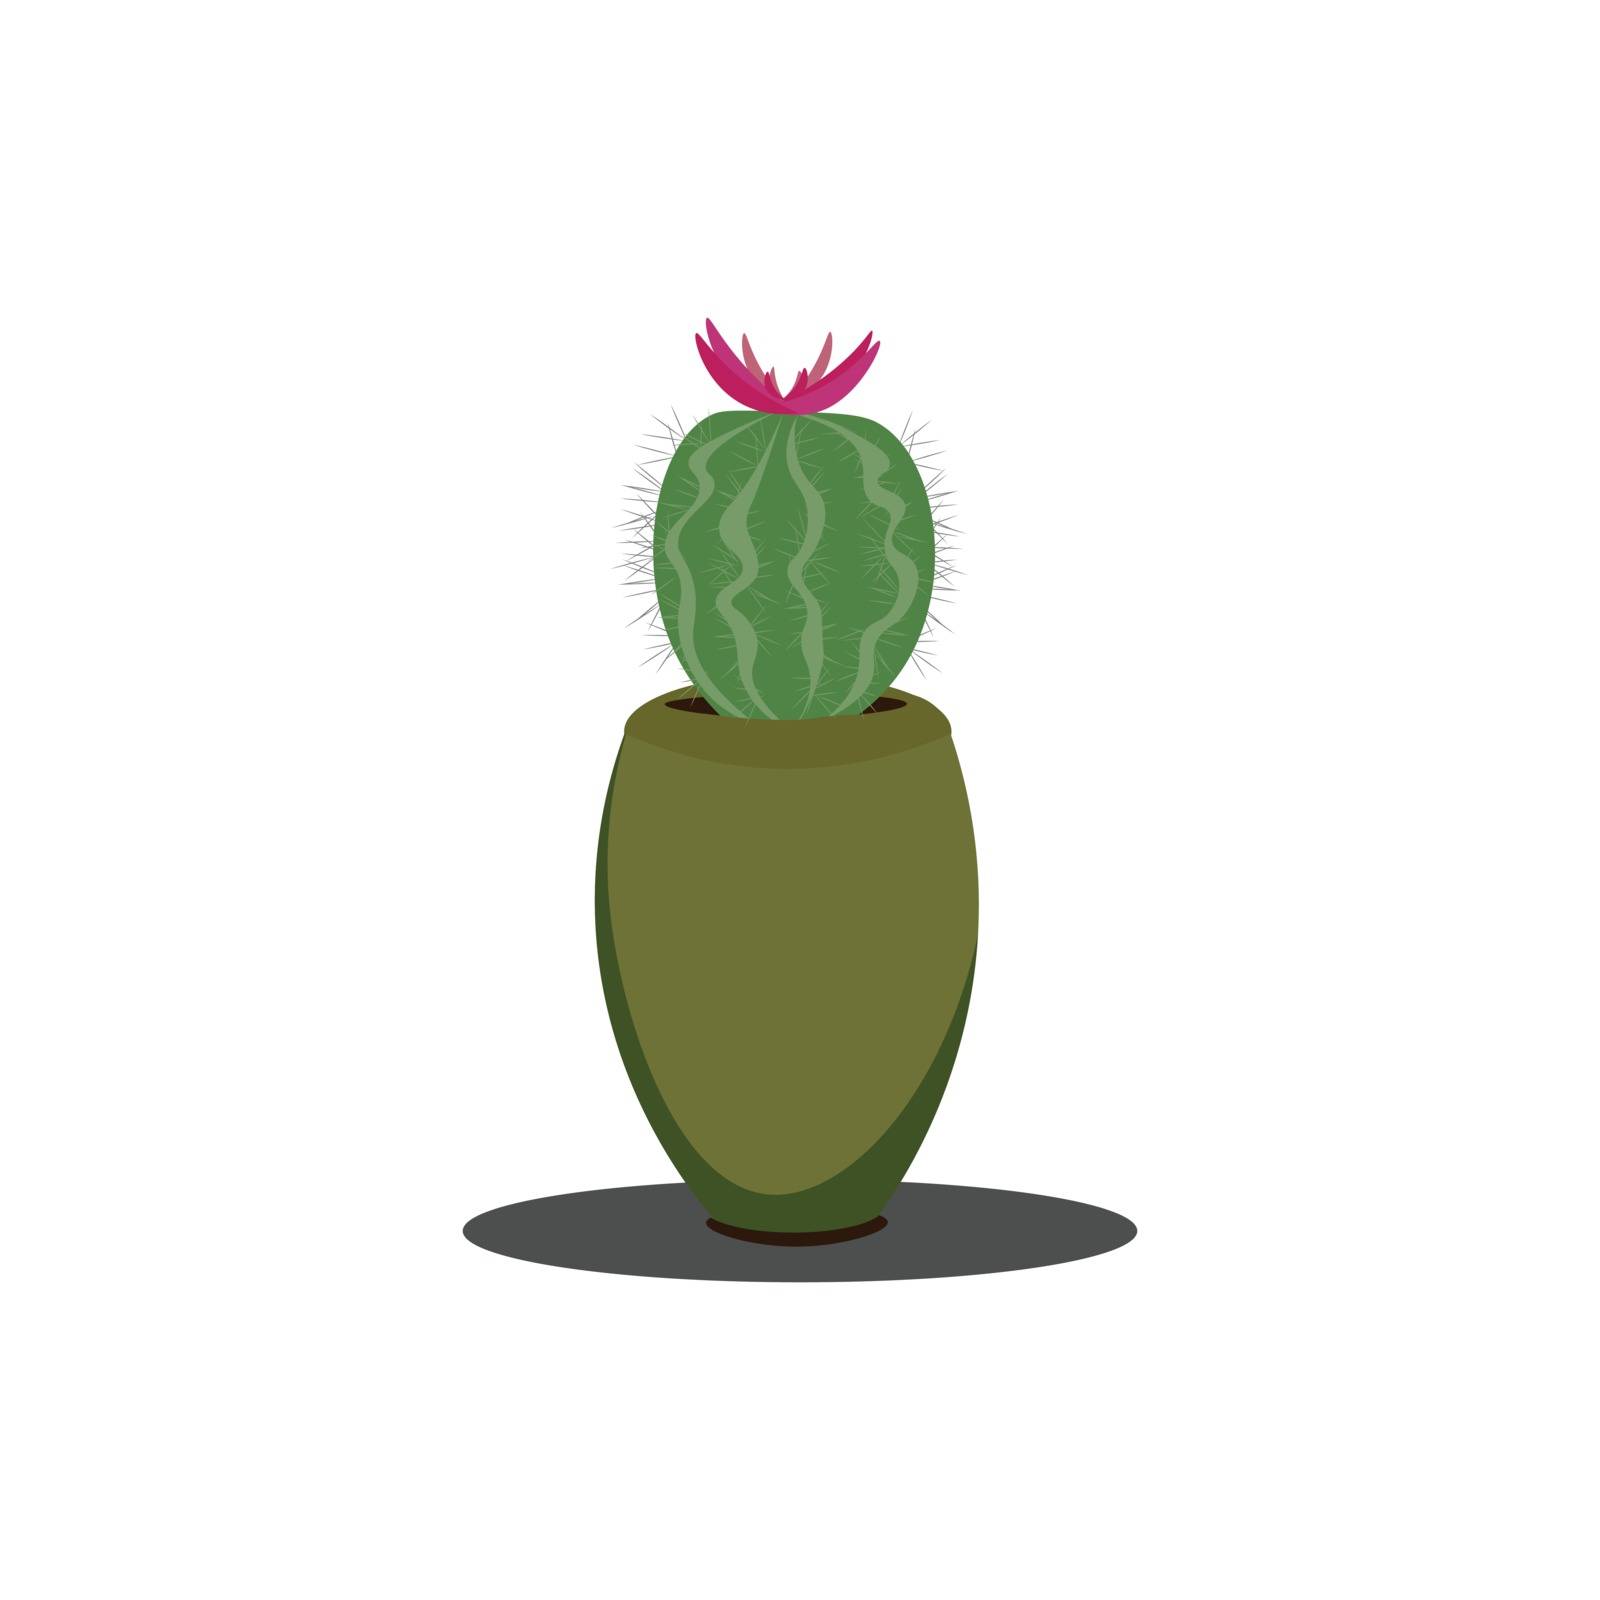 Cactus in the blooming stage vector illustration 